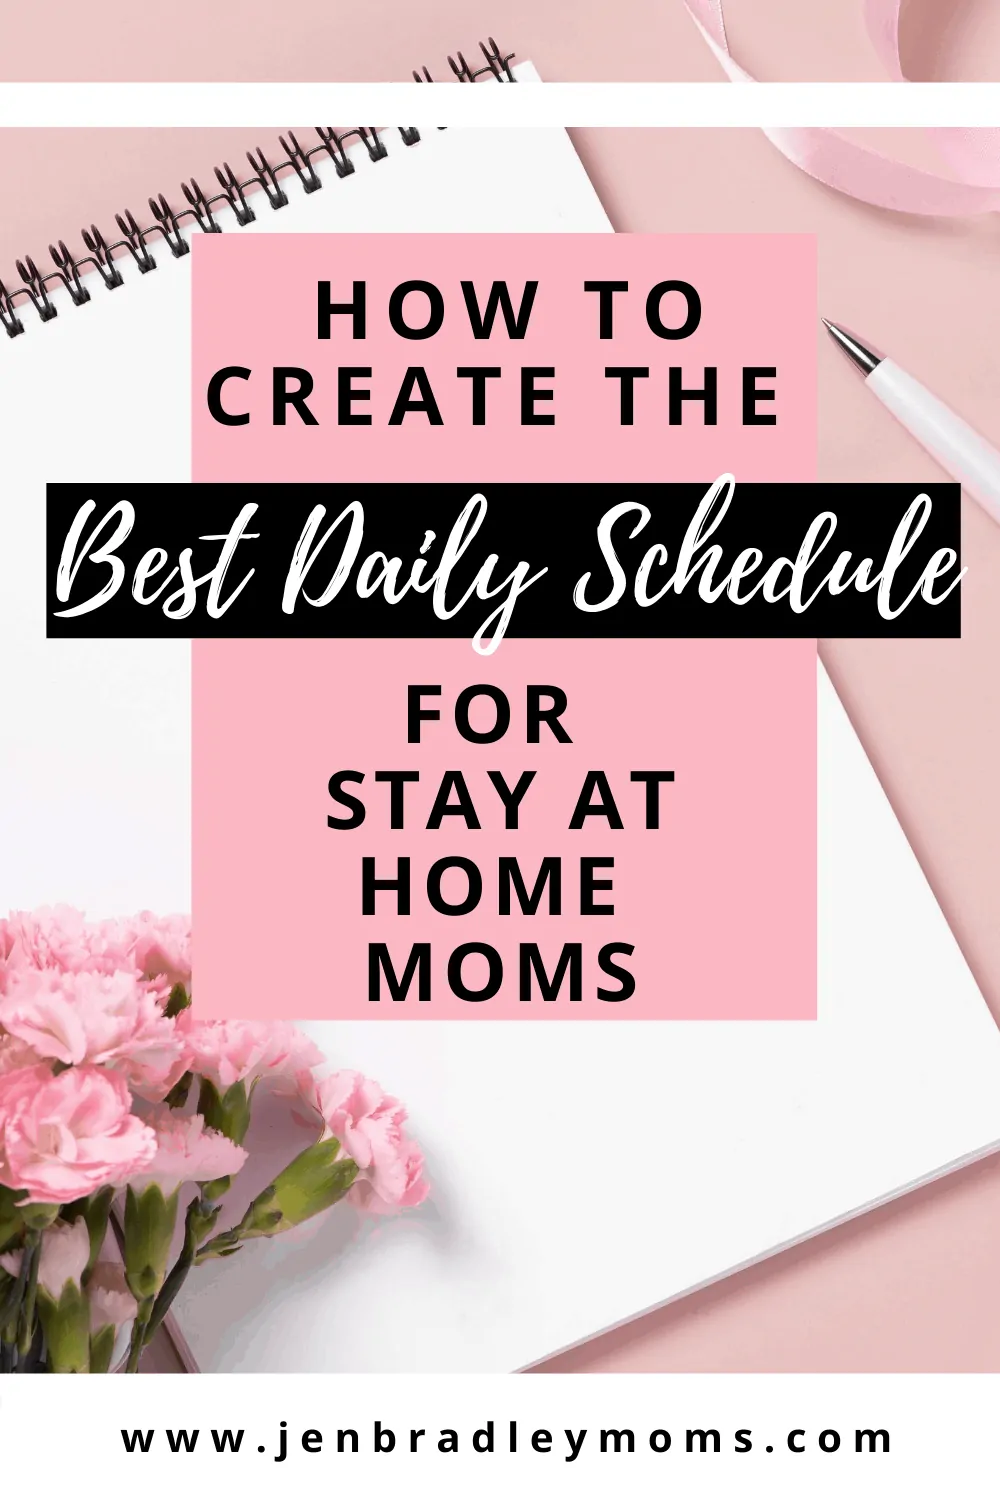 How to Create the Best Stay at Home Mom Schedule